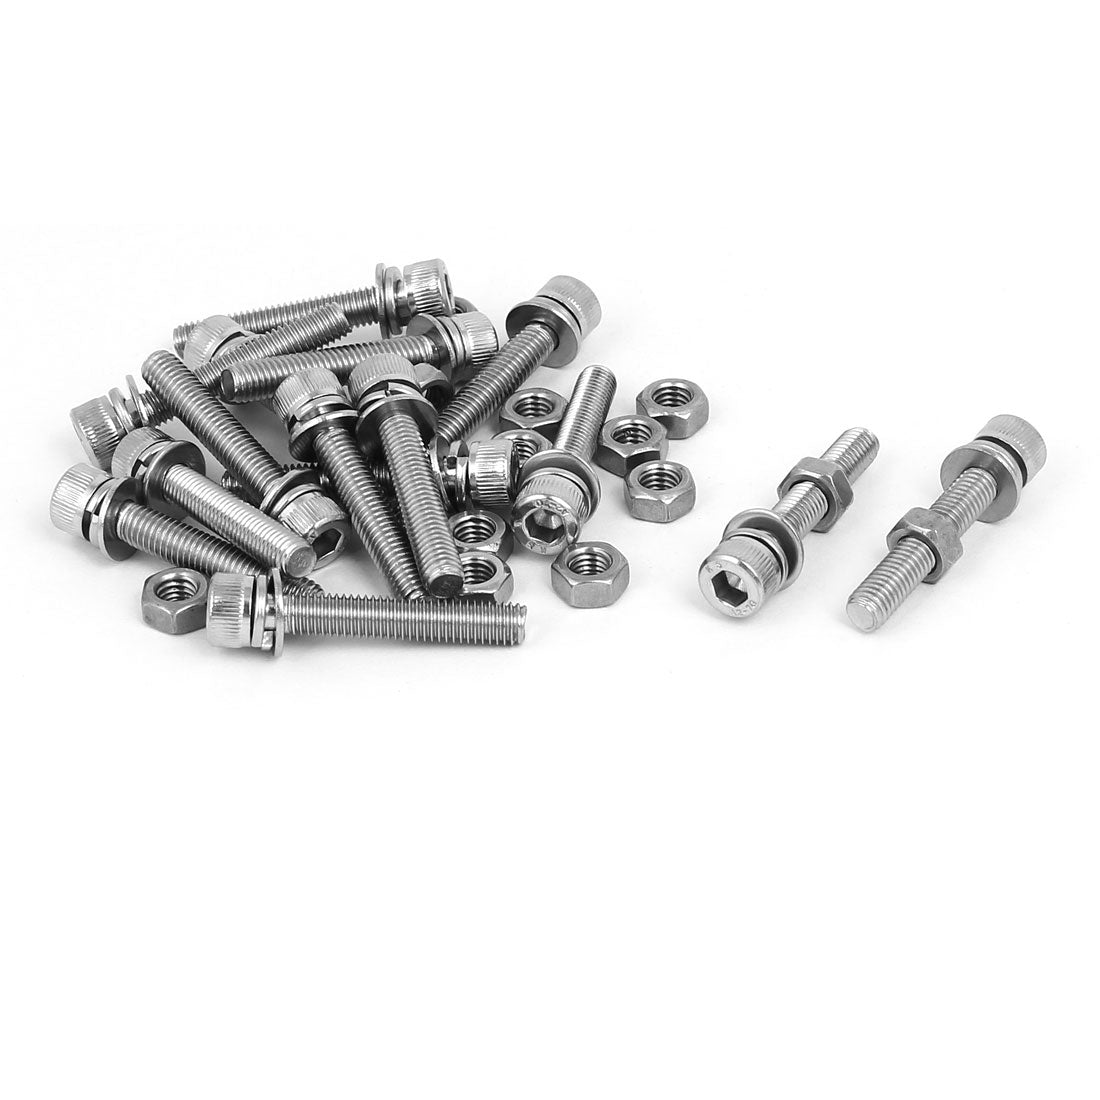 uxcell Uxcell M5 x 30mm 304 Stainless Steel Hex Socket Head Cap Screws Nuts w Washers 15 Sets